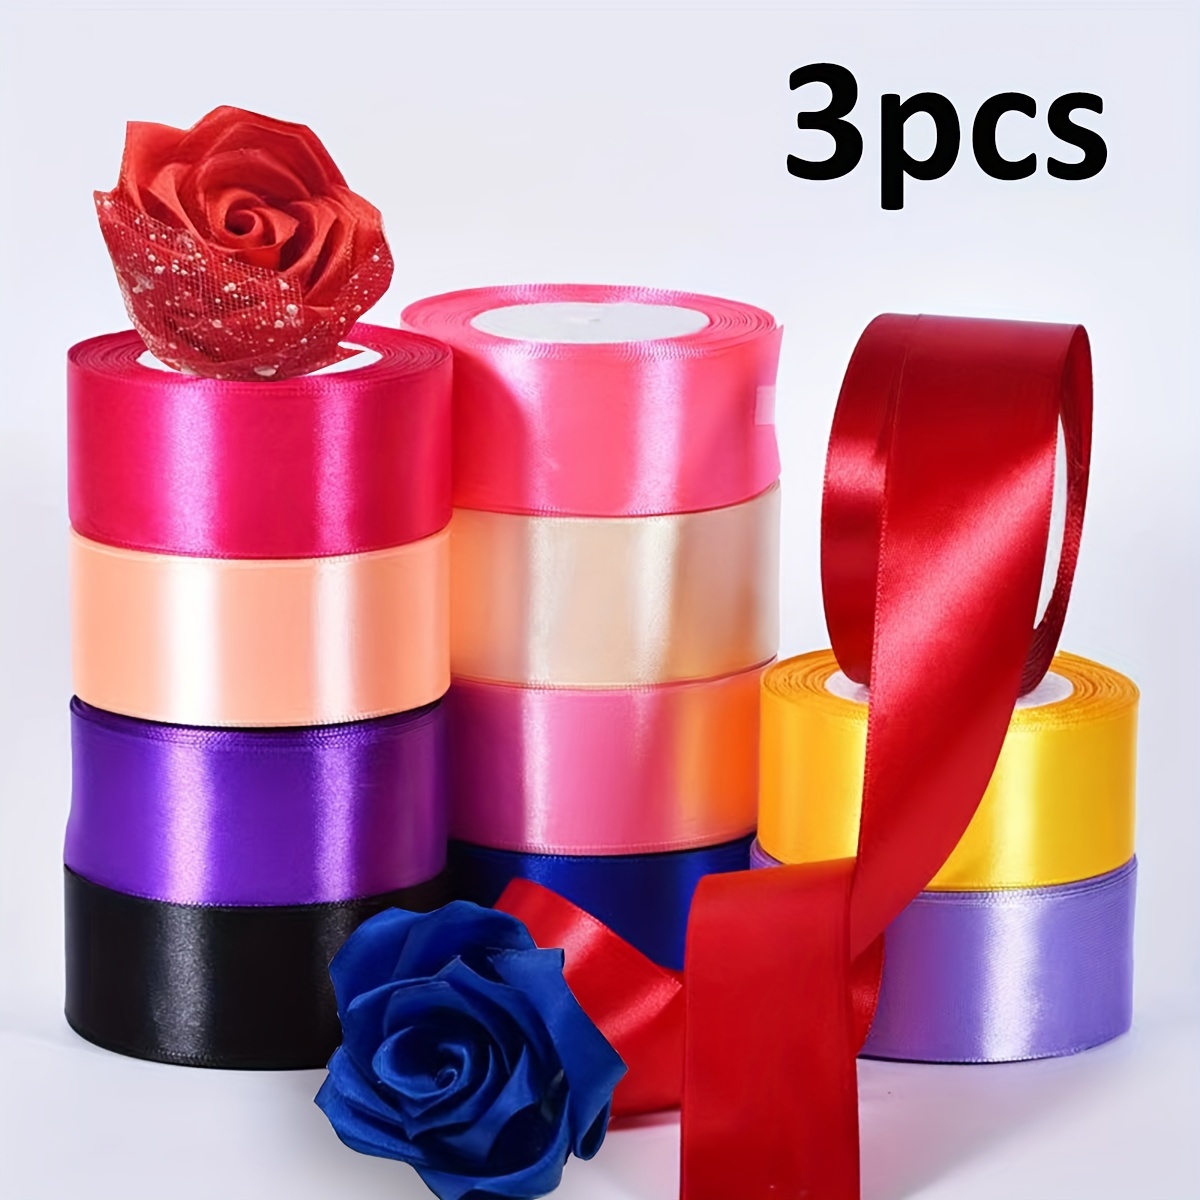 

3-piece Purple Satin Ribbon 4cm Wide X 22m Long - Perfect For Cake Decorating, Gift Wrapping & Diy Crafts - Ideal For Weddings, Christmas, Valentine's Day & More